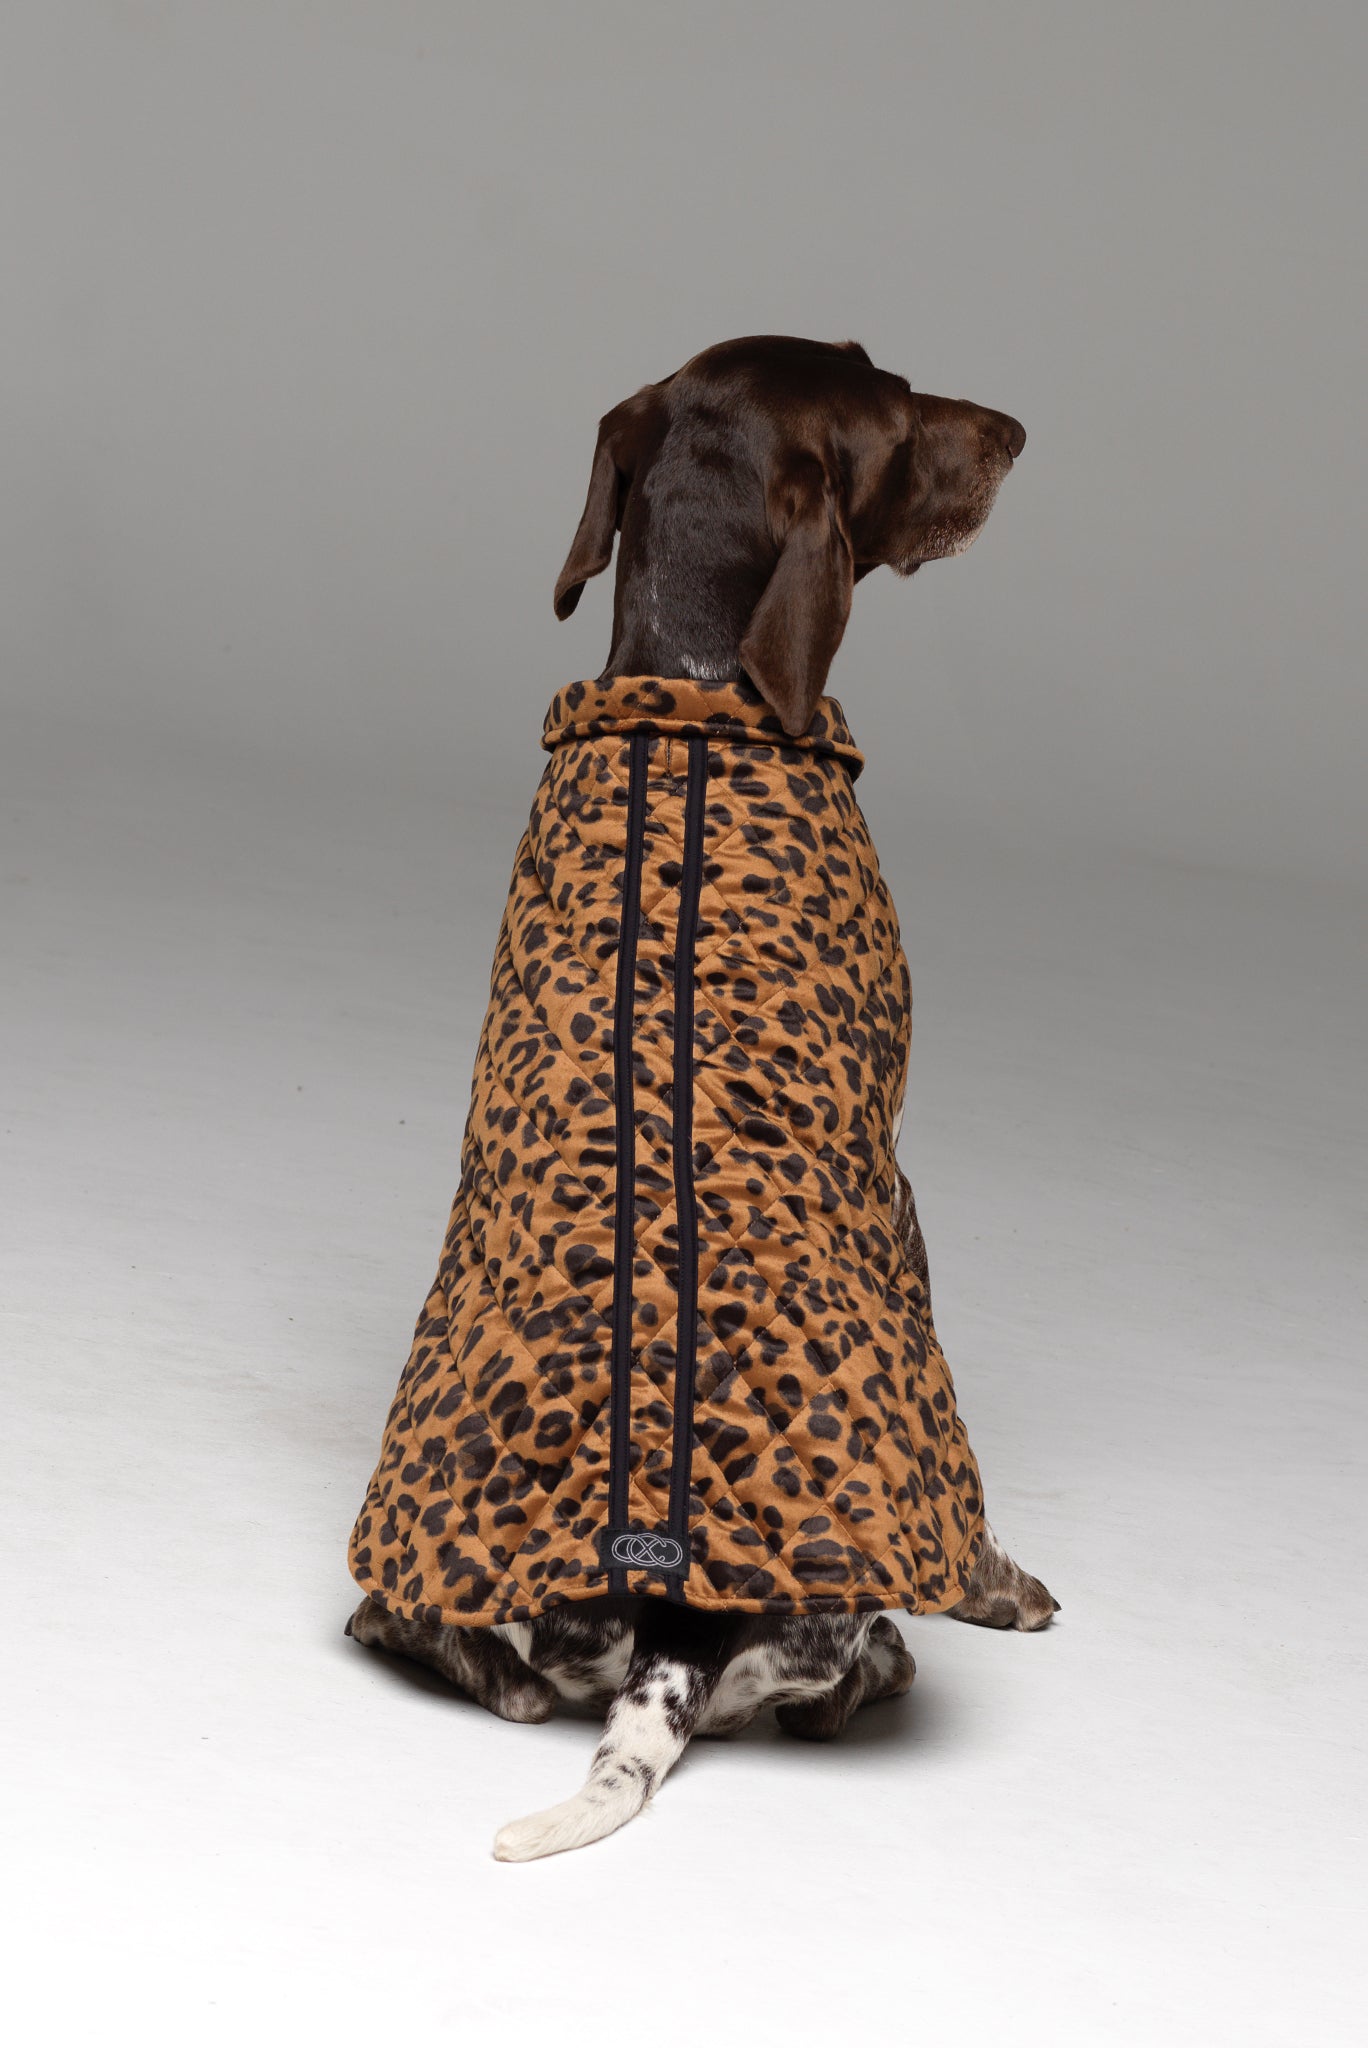 Furbaby Dog Coat in Bronzed Baby showing the 2-stripe sporty design across the dog's back.